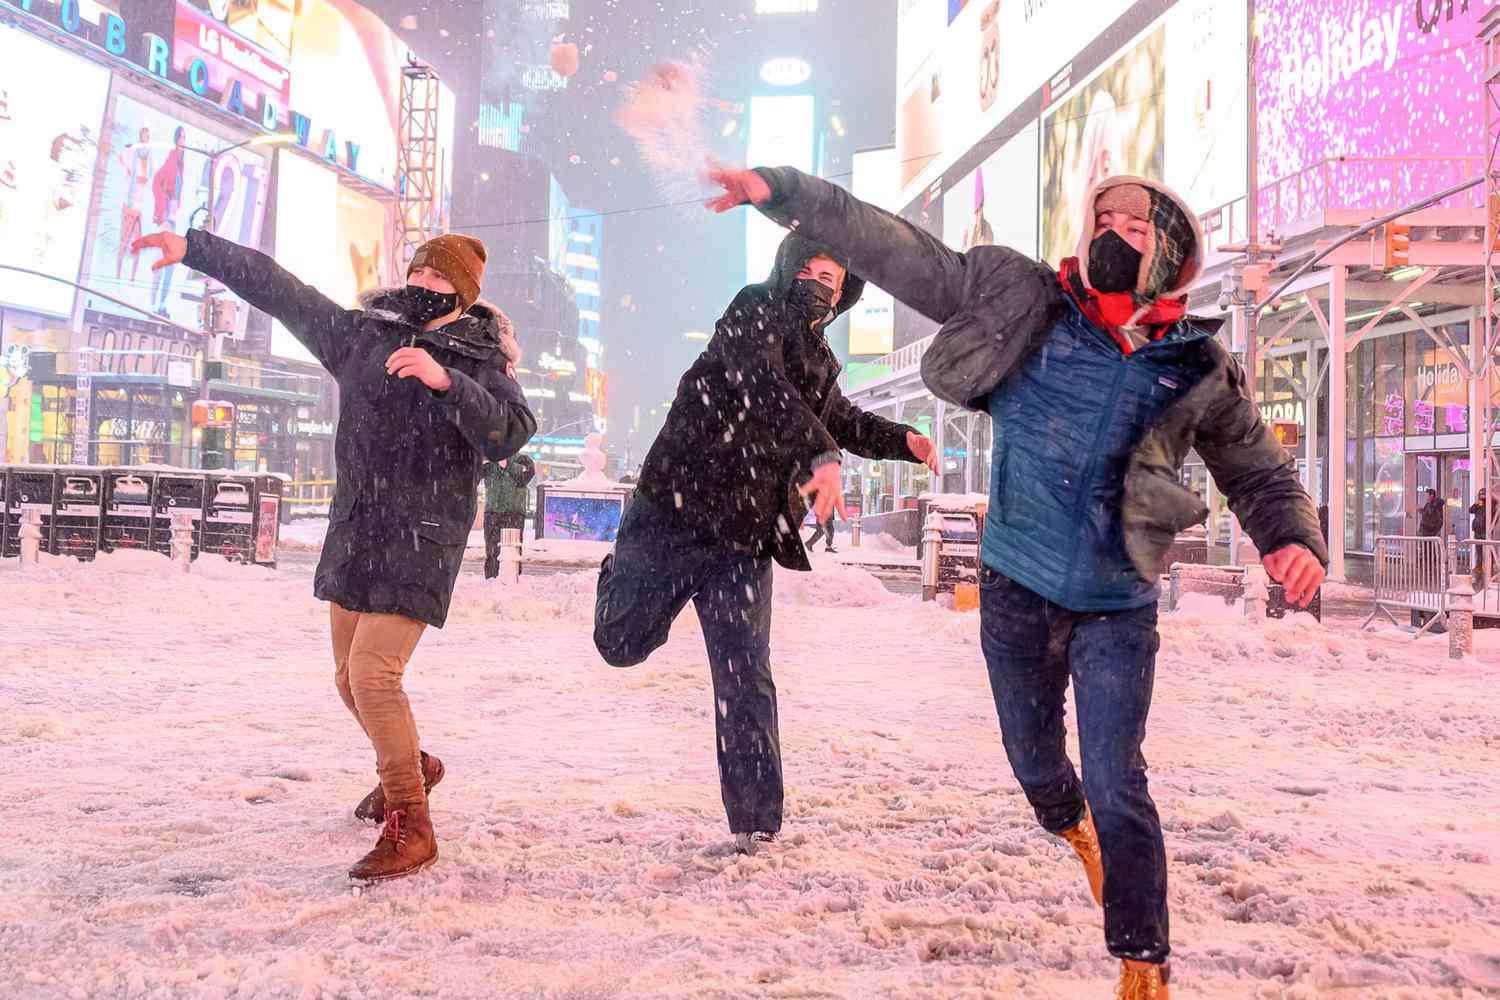 People throw snow balls during a snow storm in Times Square on December 16, 2020 in New York City